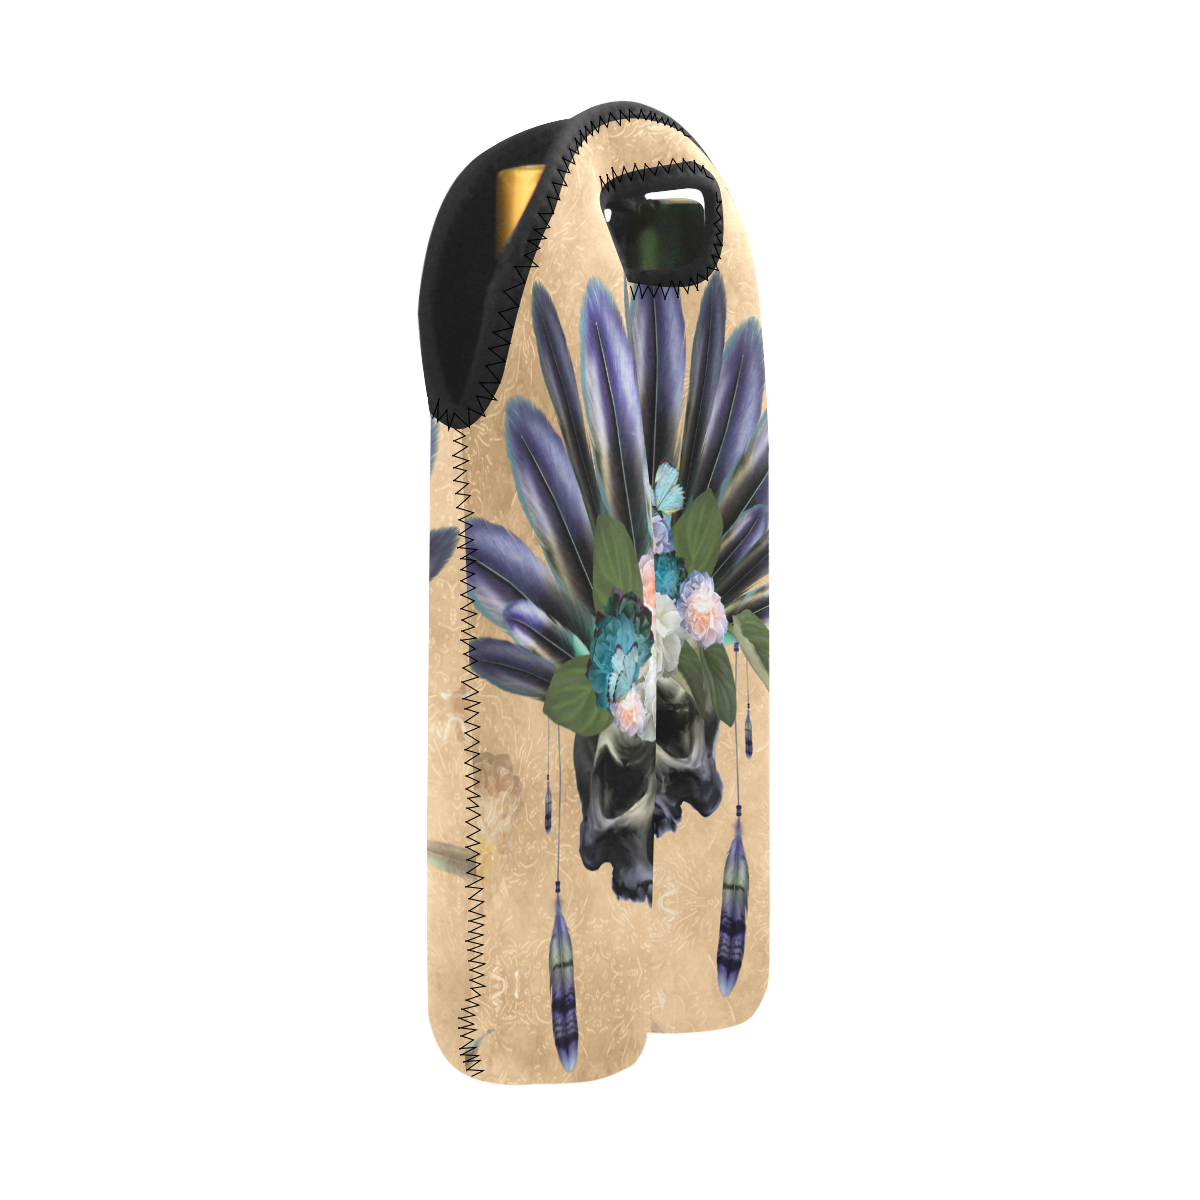 Cool skull with feathers and flowers 2-Bottle Neoprene Wine Bag